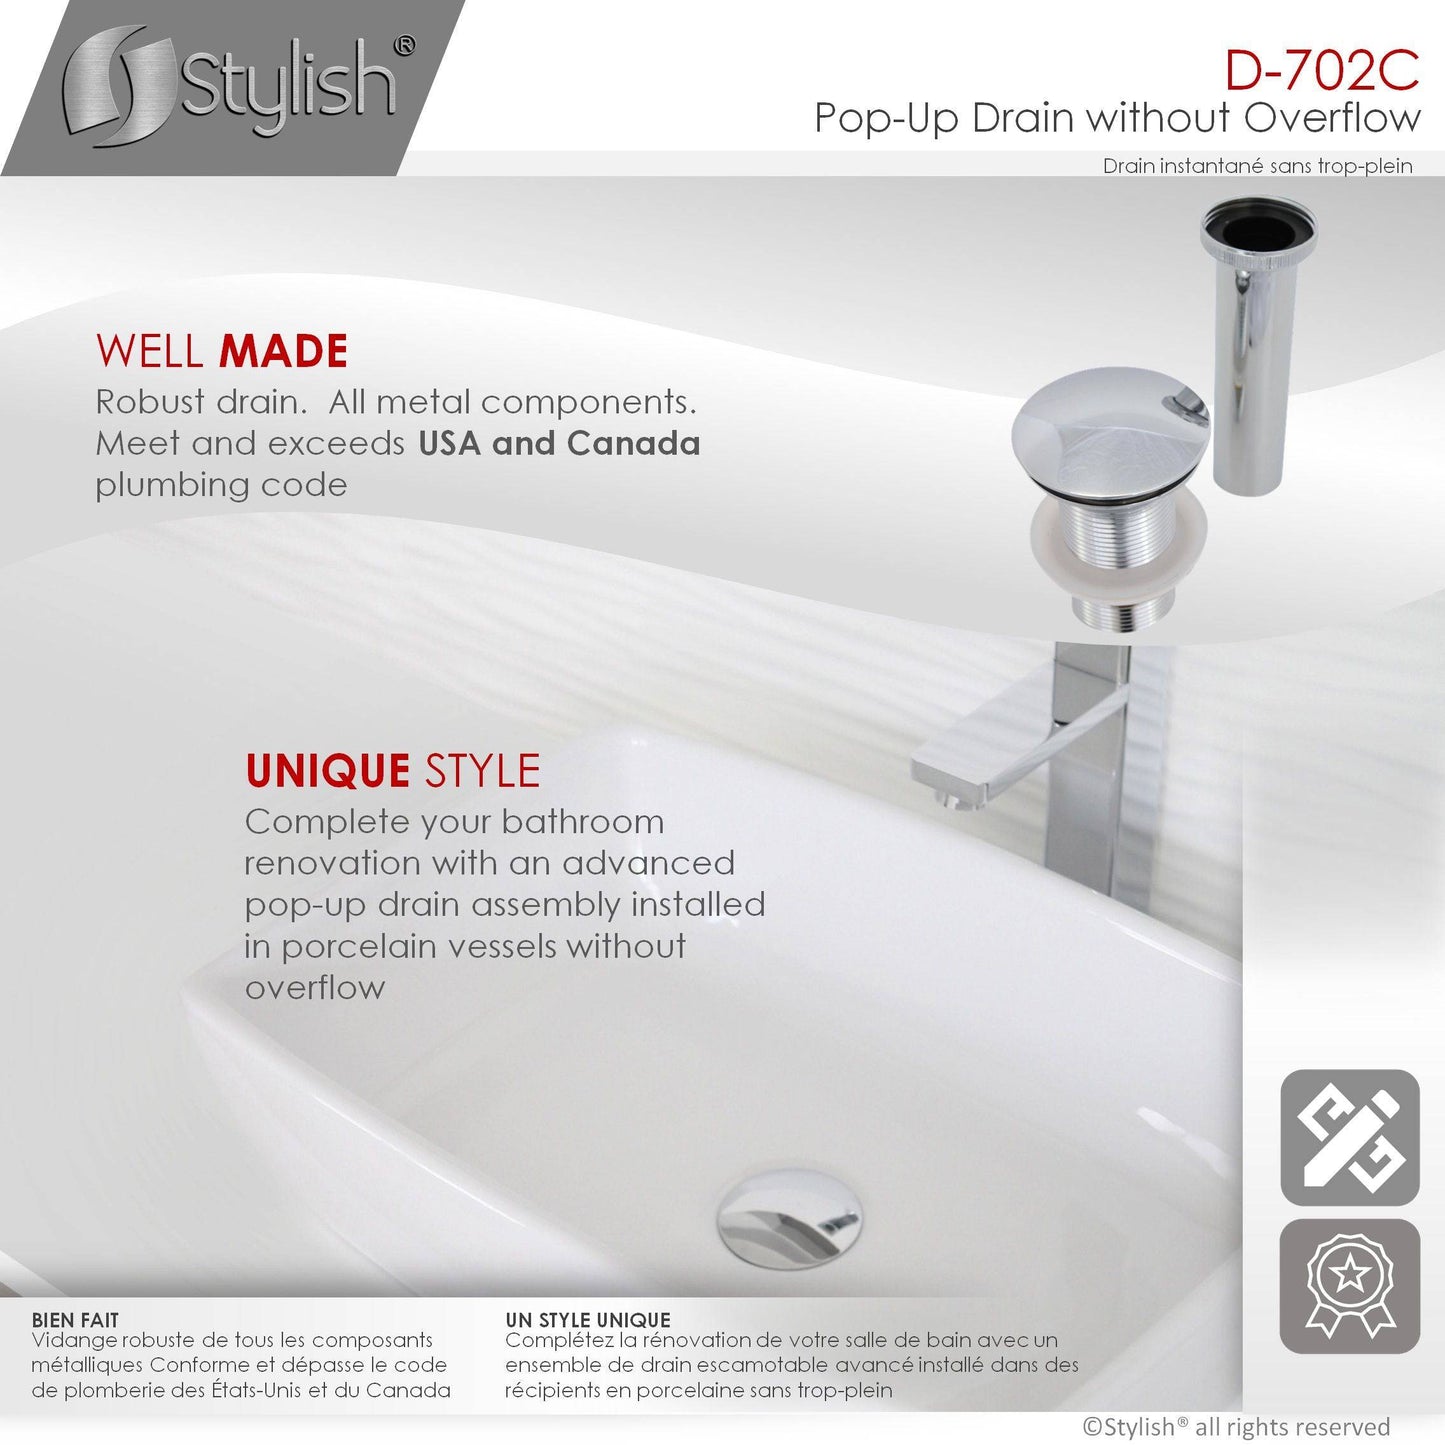 Stylish Pop-Up Drain with Overflow D-702C